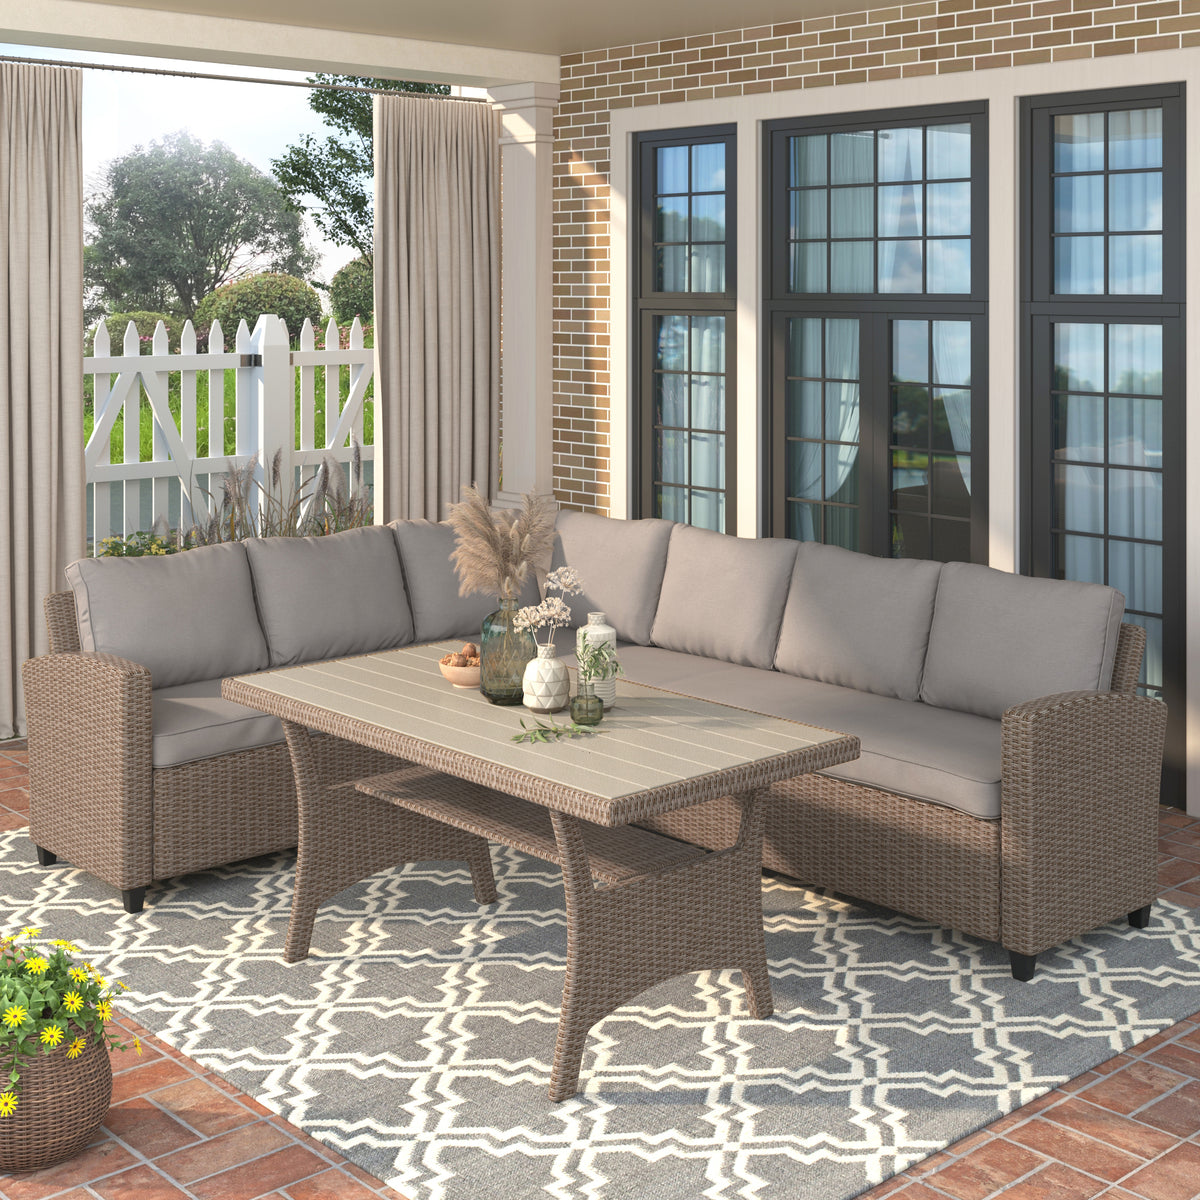 Patio Rattan Dining Set All-Weather Sectional Sofa with Table & Cushions